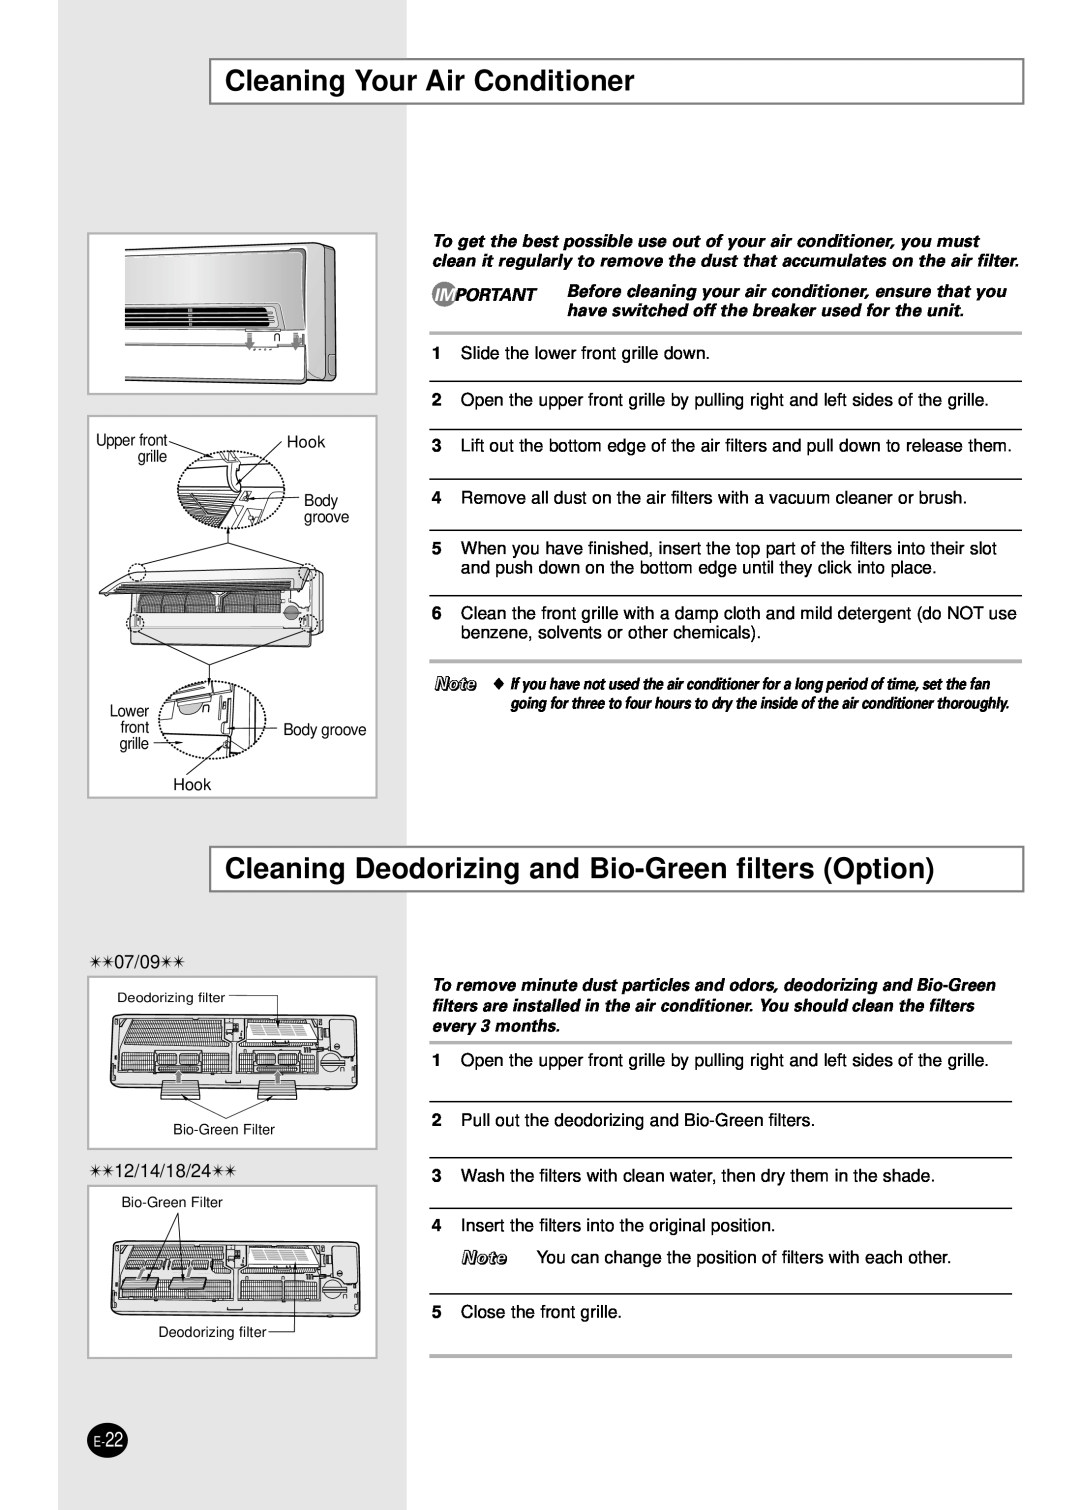 Samsung US07S8GB Cleaning Your Air Conditioner, Cleaning Deodorizing and Bio-Greenfilters Option, 07/09, 12/14/18/24 